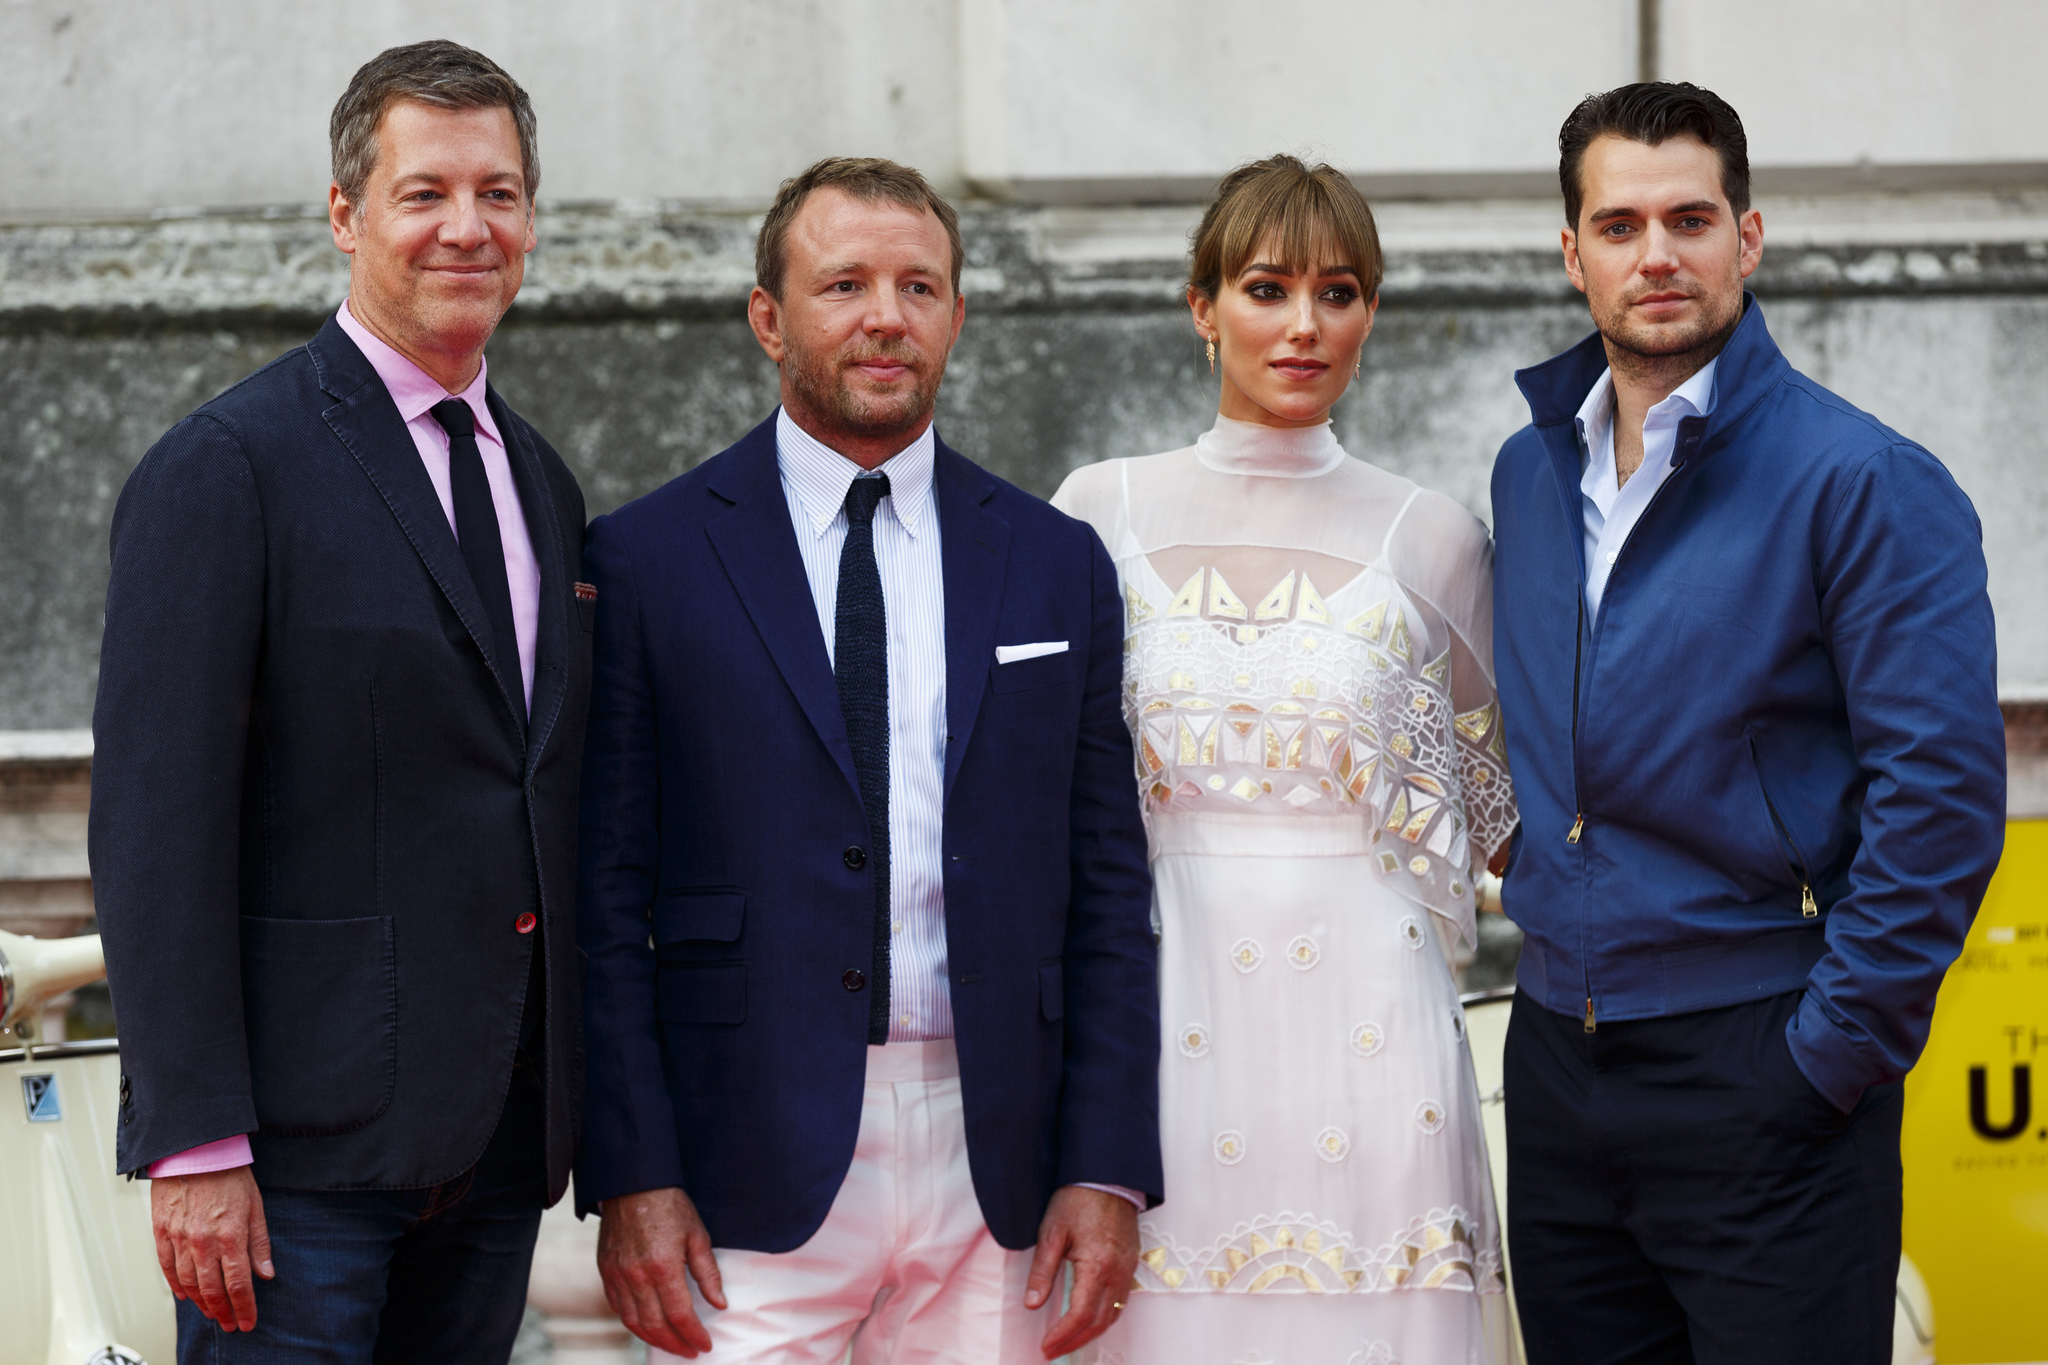 Guy Ritchie, Henry Cavill, Lionel Wigram and Jacqui Ainsley